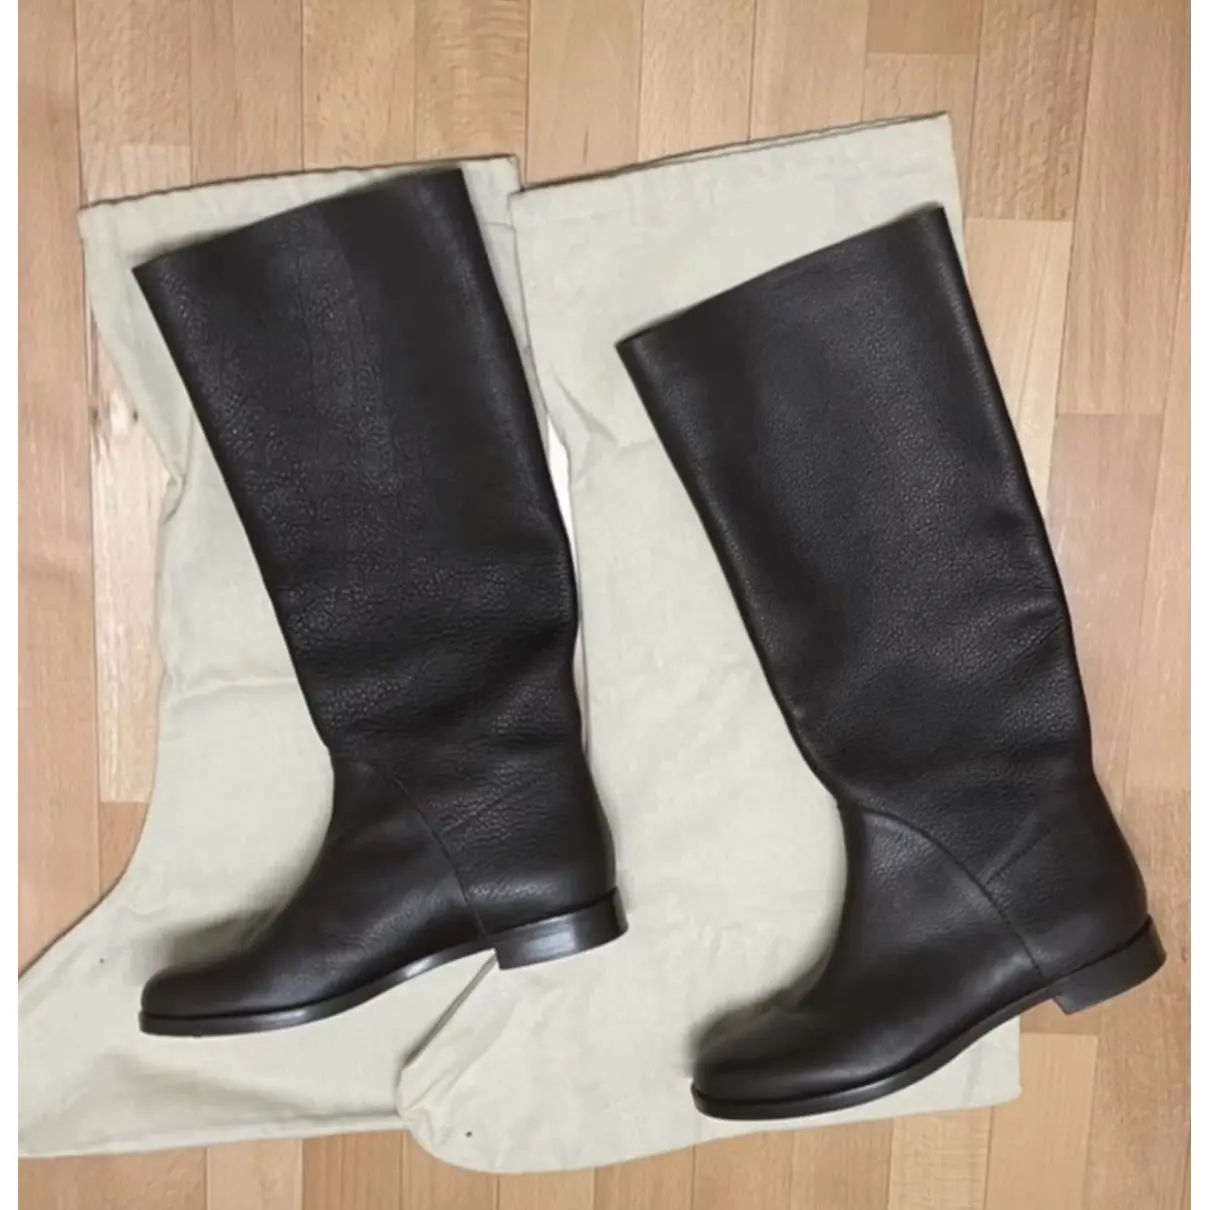 SR1 leather riding boots Sergio Rossi